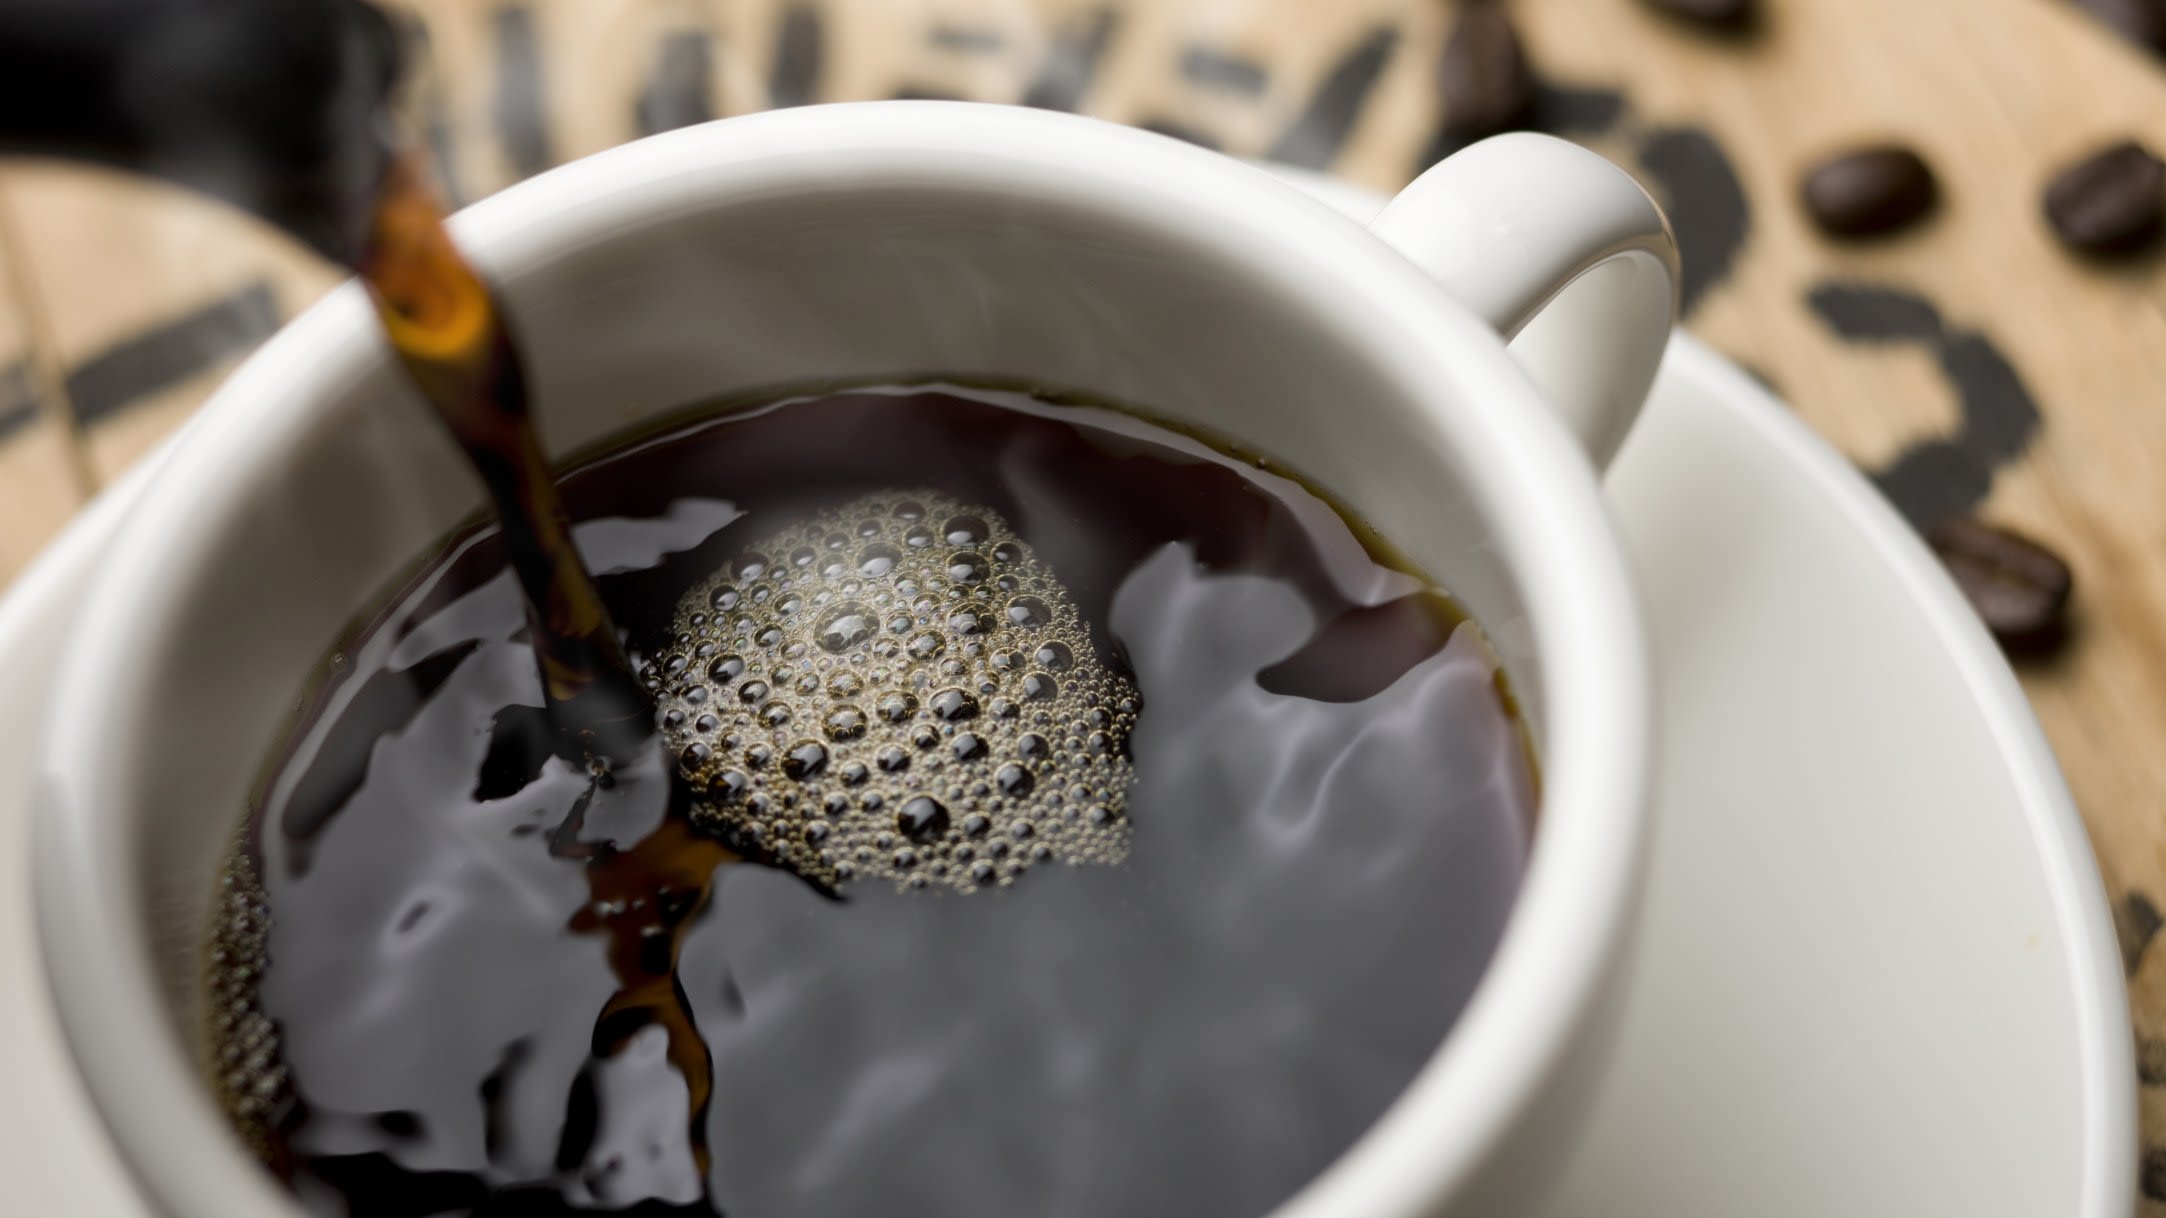 Drinking coffee linked to healthier hearts and longer lives - Harvard Health